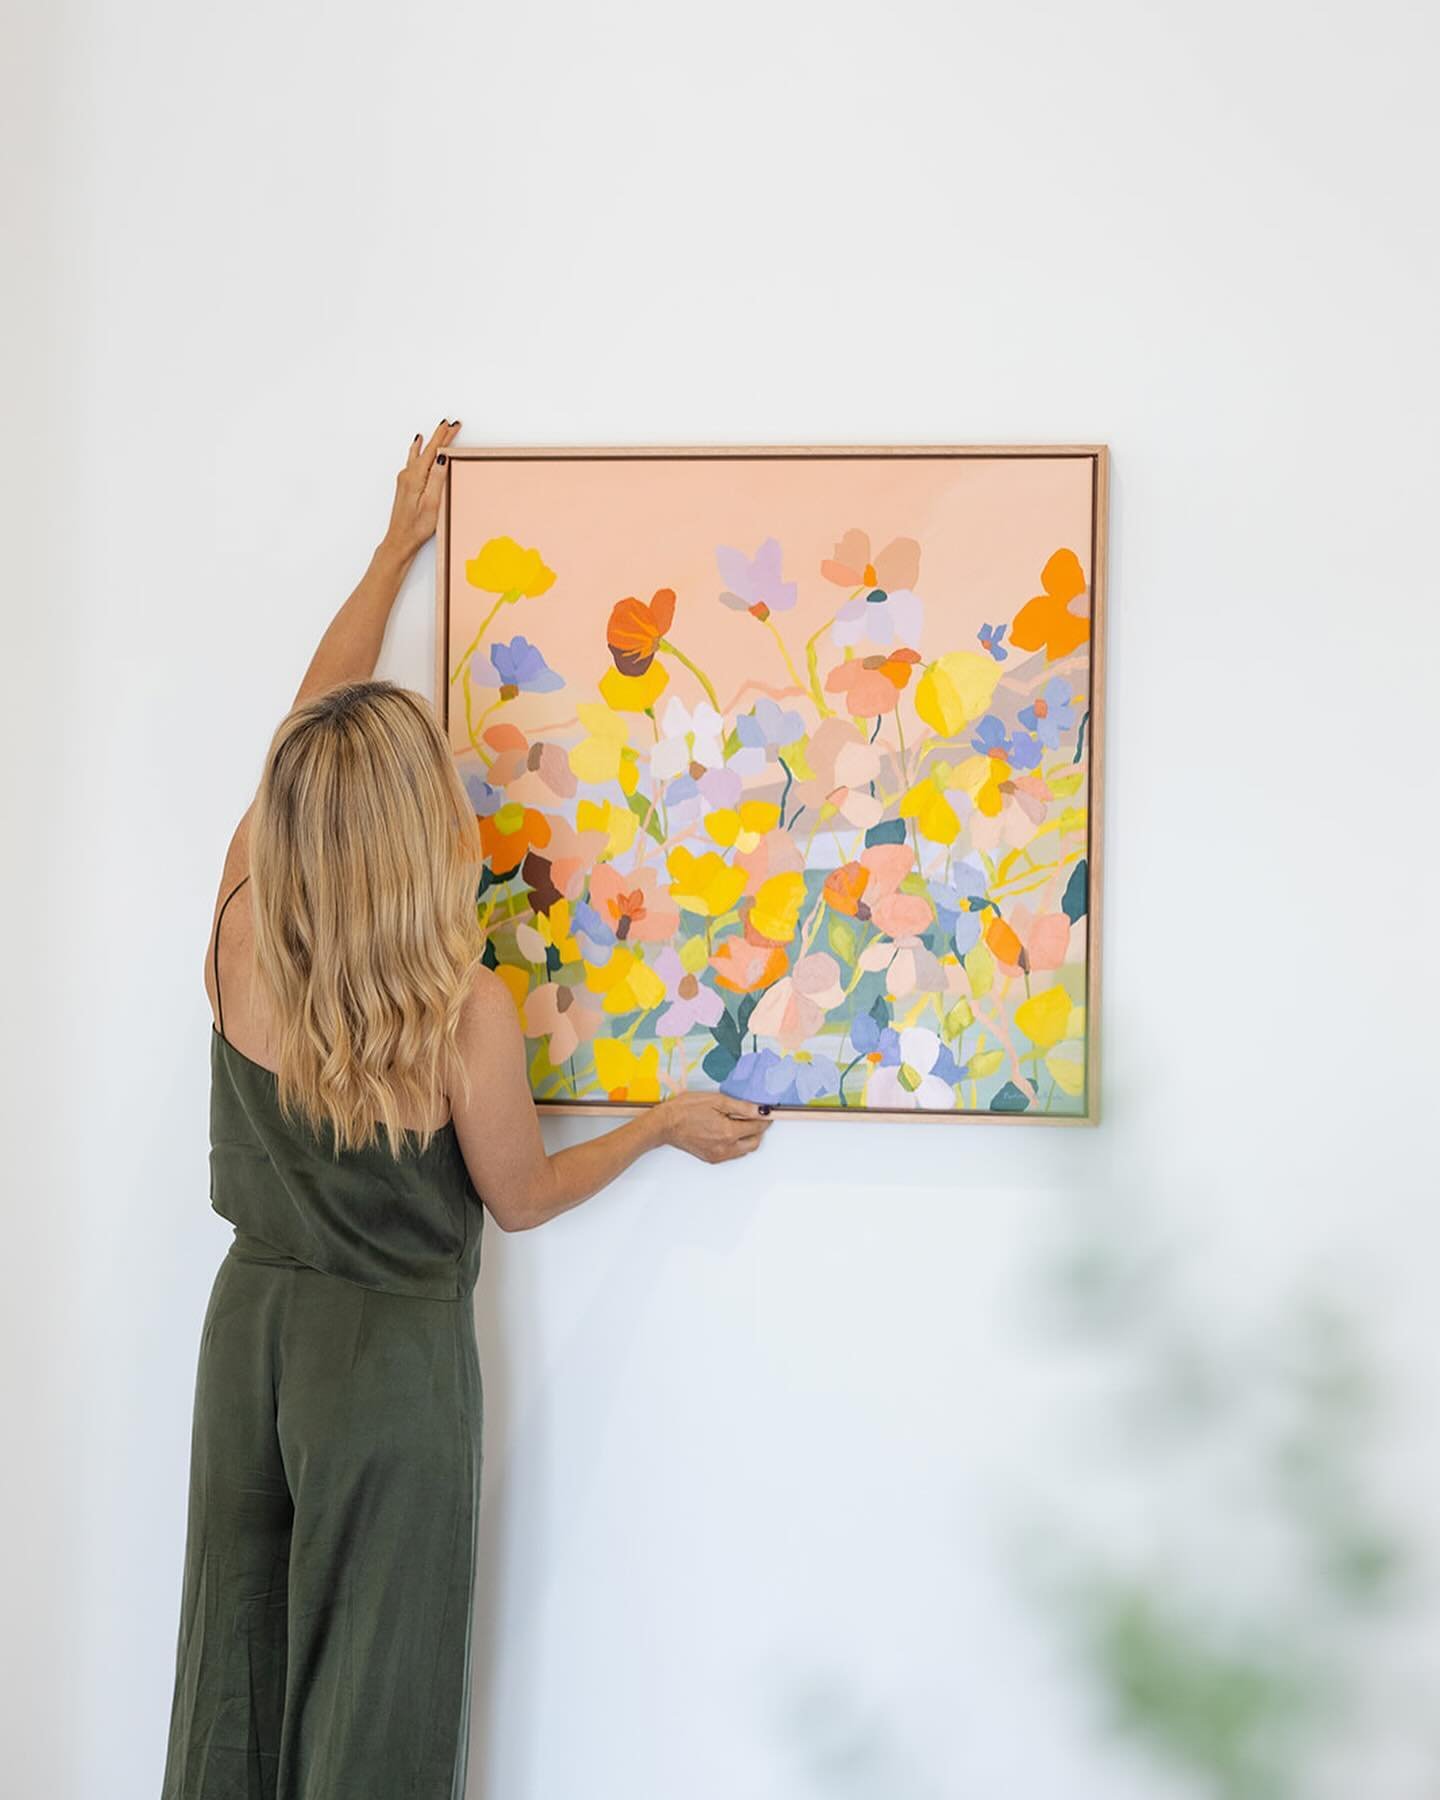 WIN this original painting. 🌼🌼🌼

HUNTER HOMES x Prudence De Marchi
Mother&rsquo;s Day Giveaway!

Have you got weekend plans? All you need to do is visit the Kenneth Display @huntleenewtown or jump online on @hunterhomesnsw website and fill out the